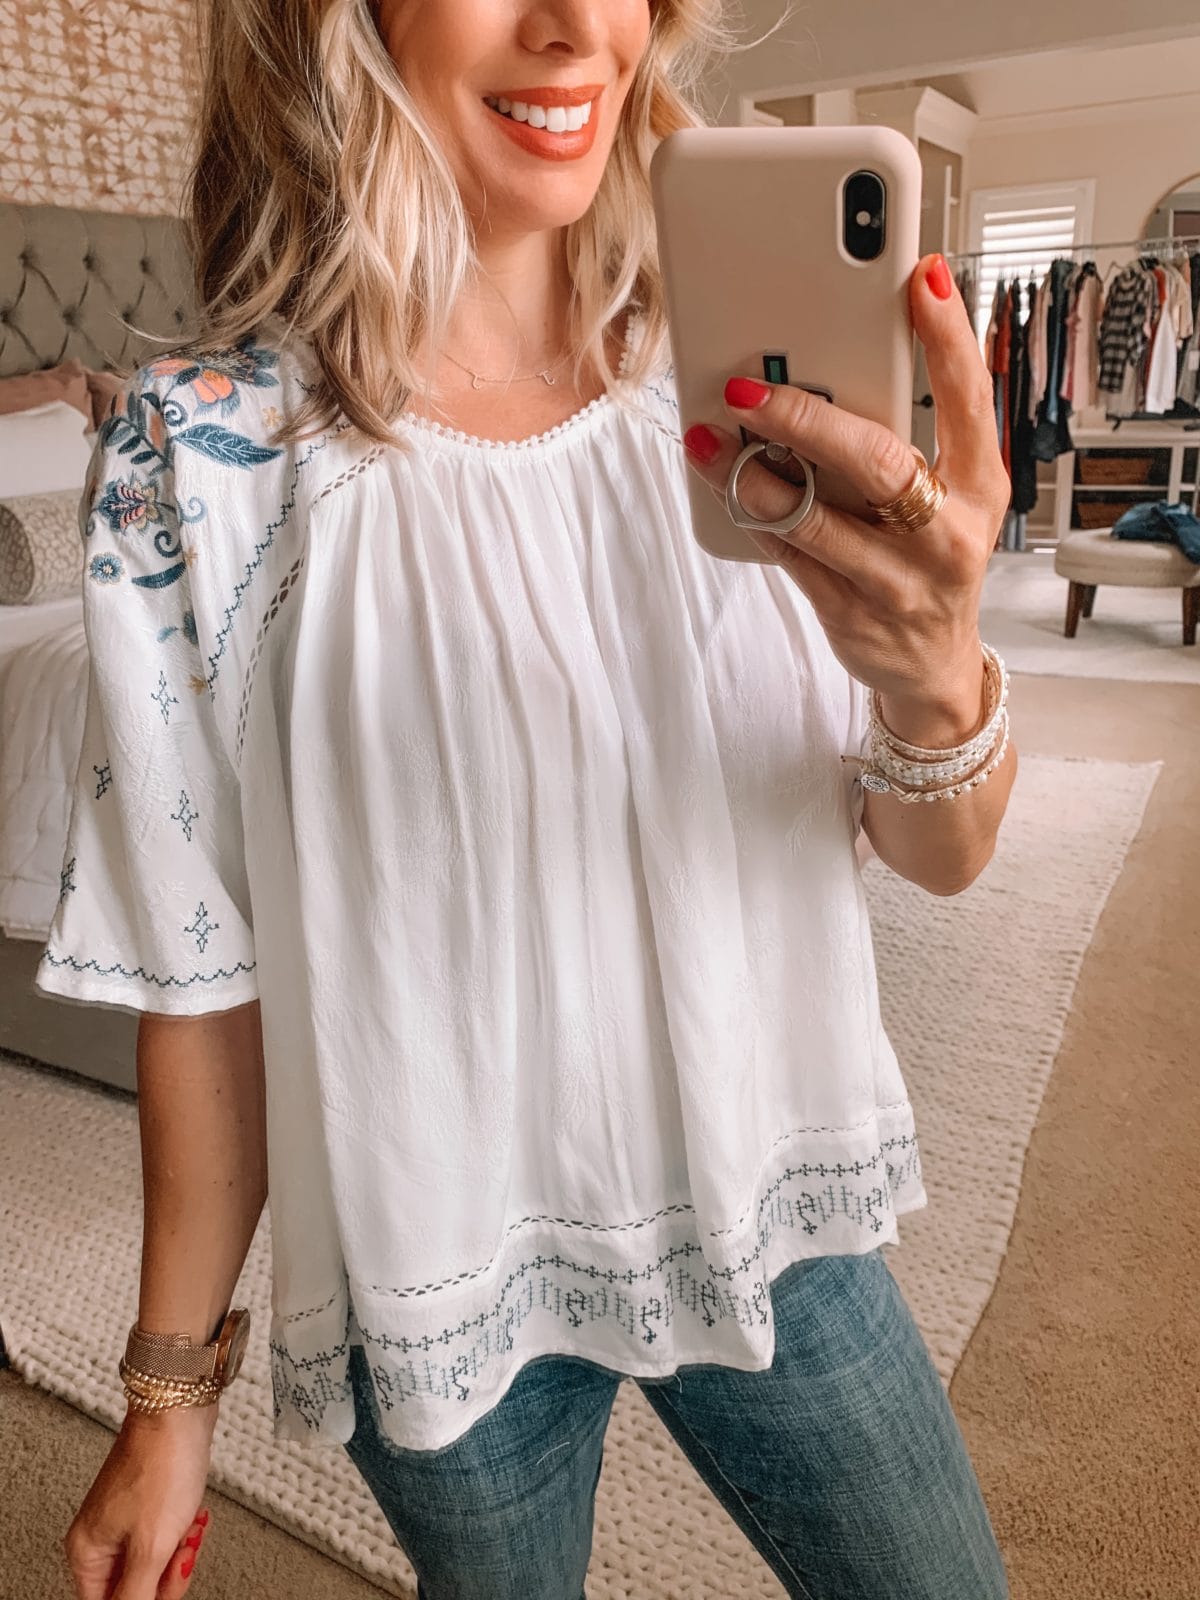 Dressing Room Finds Nordstrom and Target, White Baby Doll Top, Jeans 